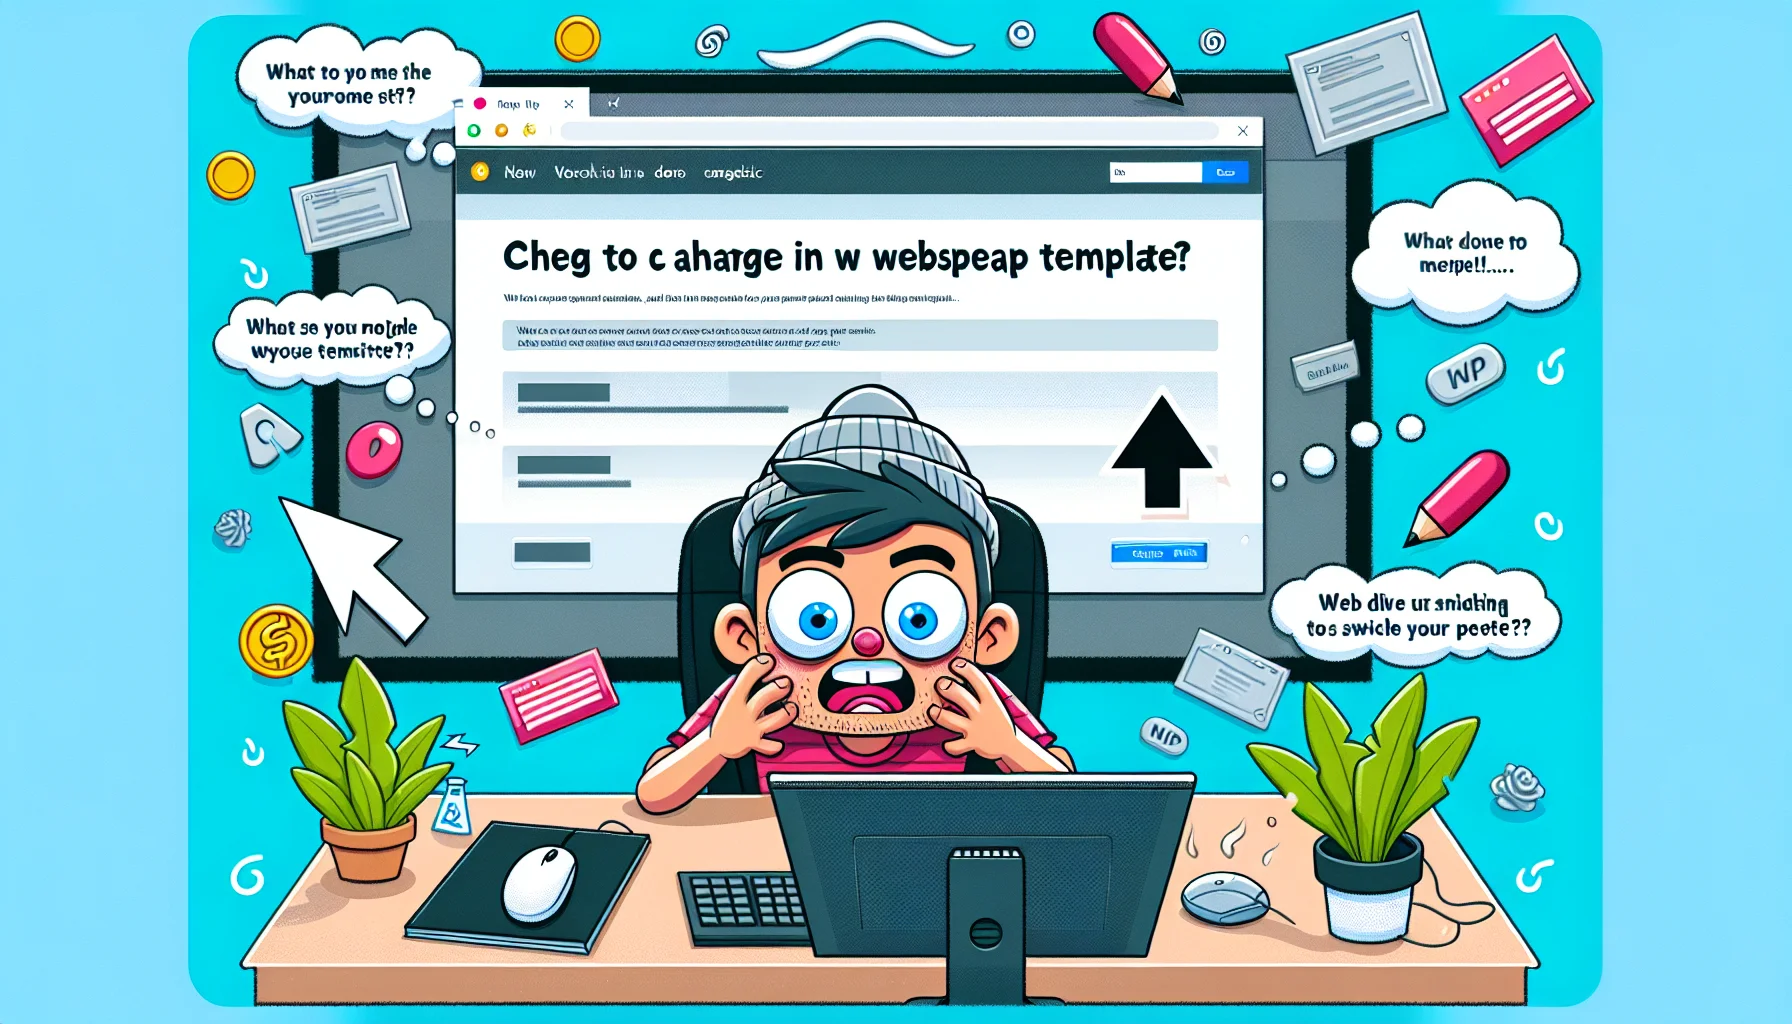 Create a humorous and captivating image illustrating the process of changing the webpage template on a generic website hosting platform. The scenario could include a user with a bewildered expression, comically oversized mouse pointer on the screen, and humorous web design elements randomly scattered around. Make sure to include various on-screen prompts detailing the steps to switch a website template, contributing to the overall comedic environment. This gives a lighthearted nod to the complexities and challenges that might arise in web design and website hosting.